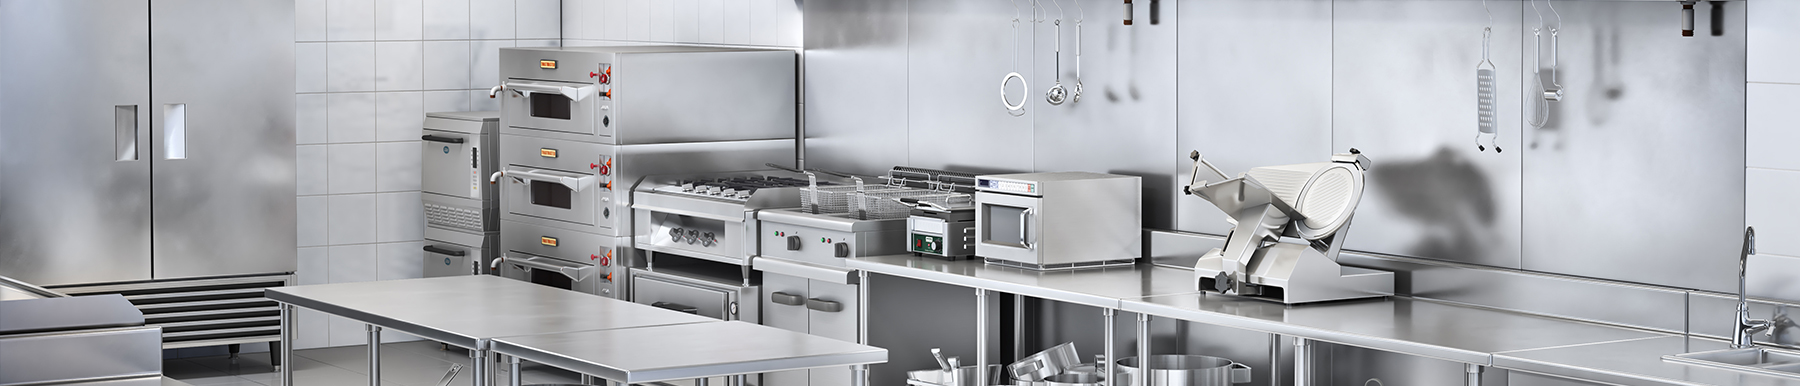 Catering Equipment Suppliers Near Newcastle-upon-Tyne | H2 Catering Equipment Catering Equipment